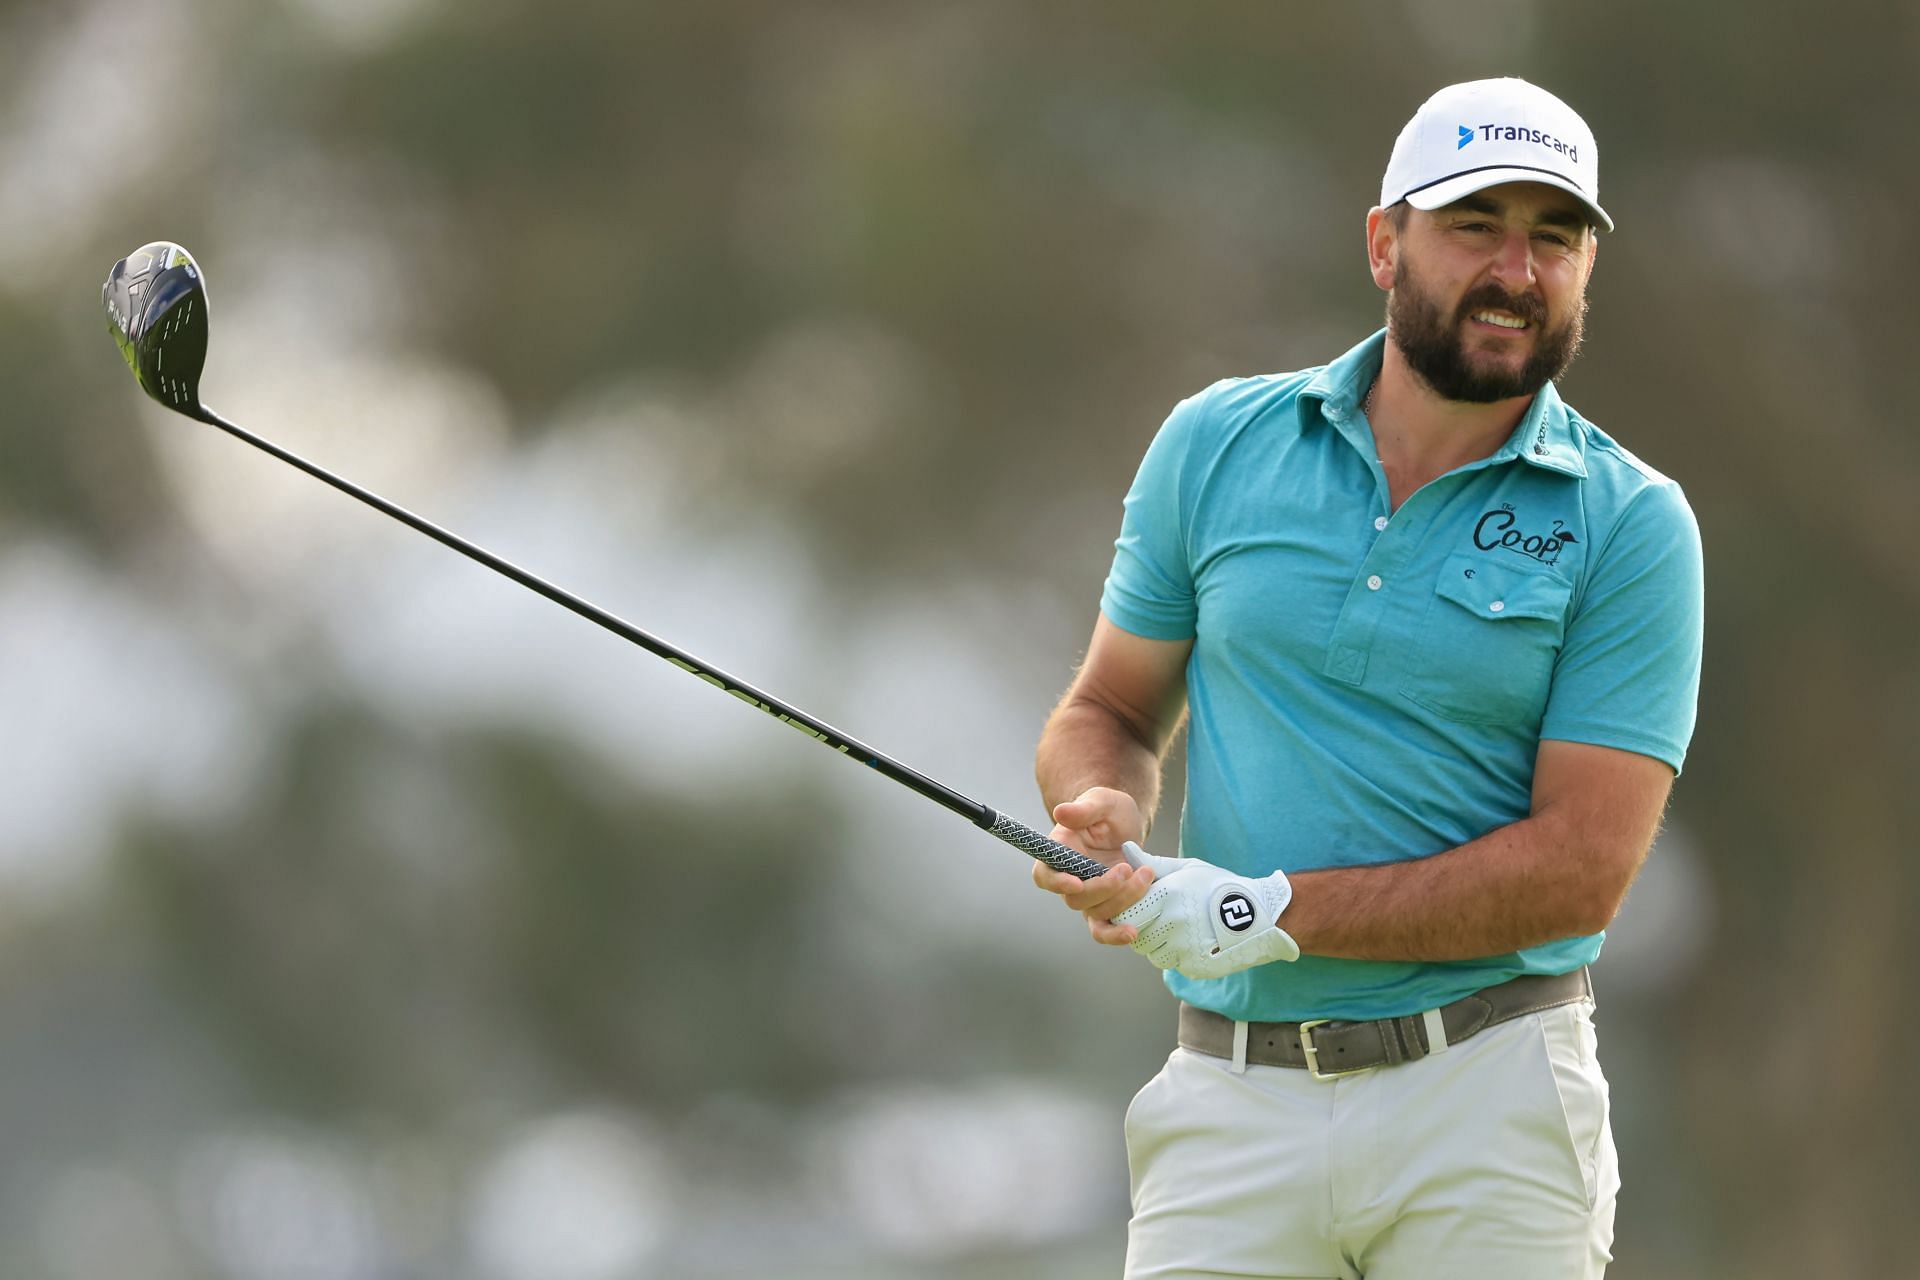 Stephan Jaeger takes the lead at the Farmers Insurance Open after two rounds